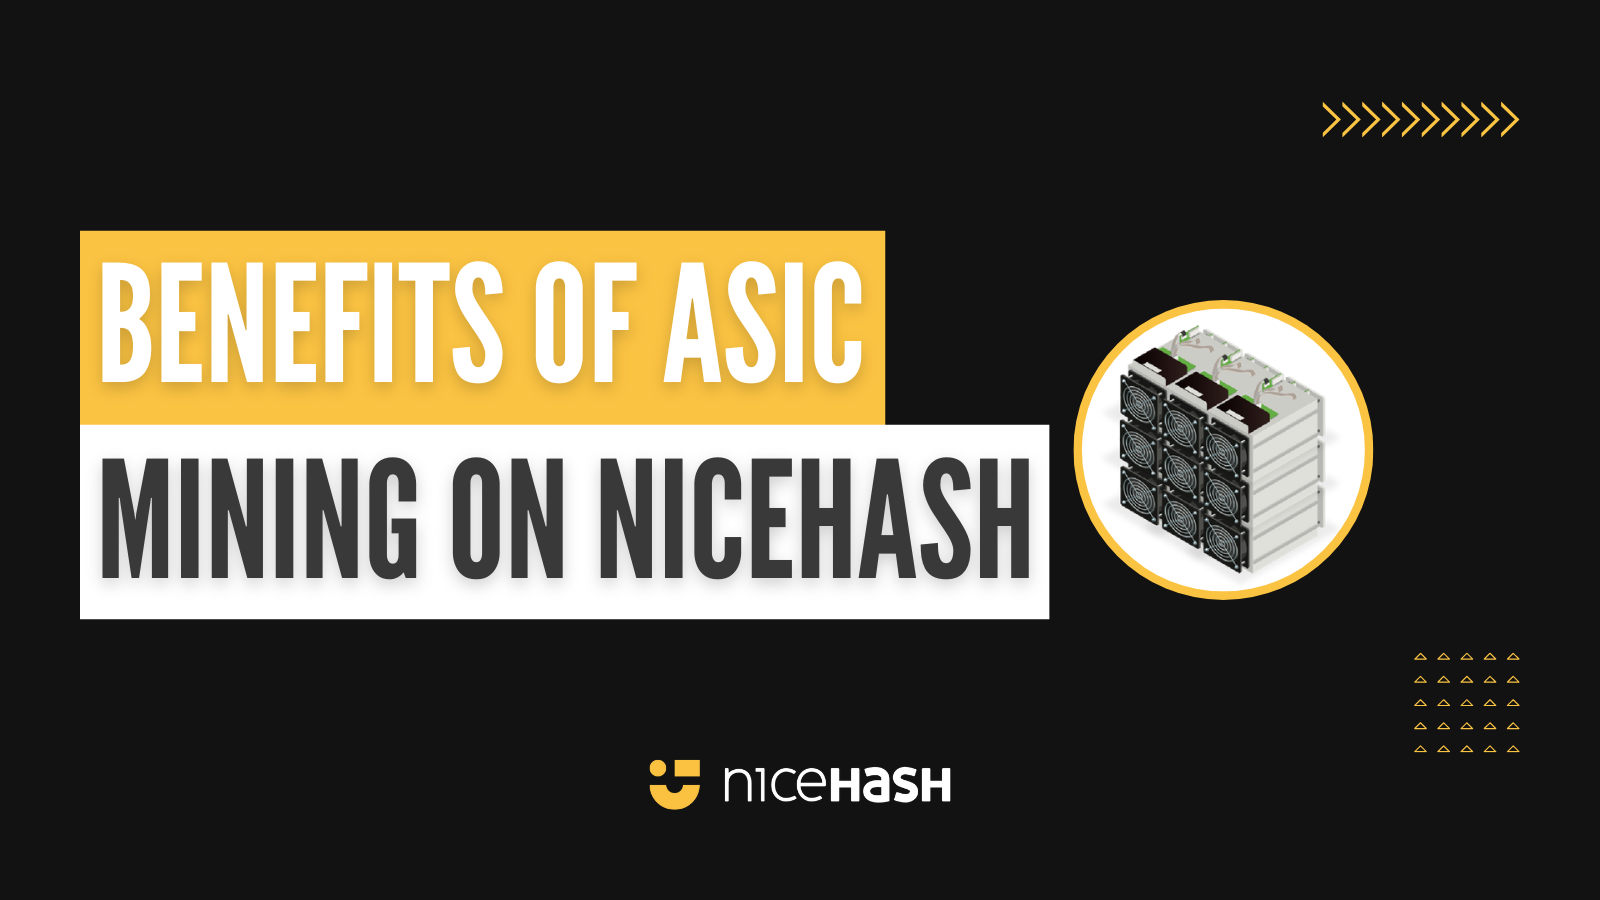 SHA256AsicBoost Miners See Increased Profits with NiceHash